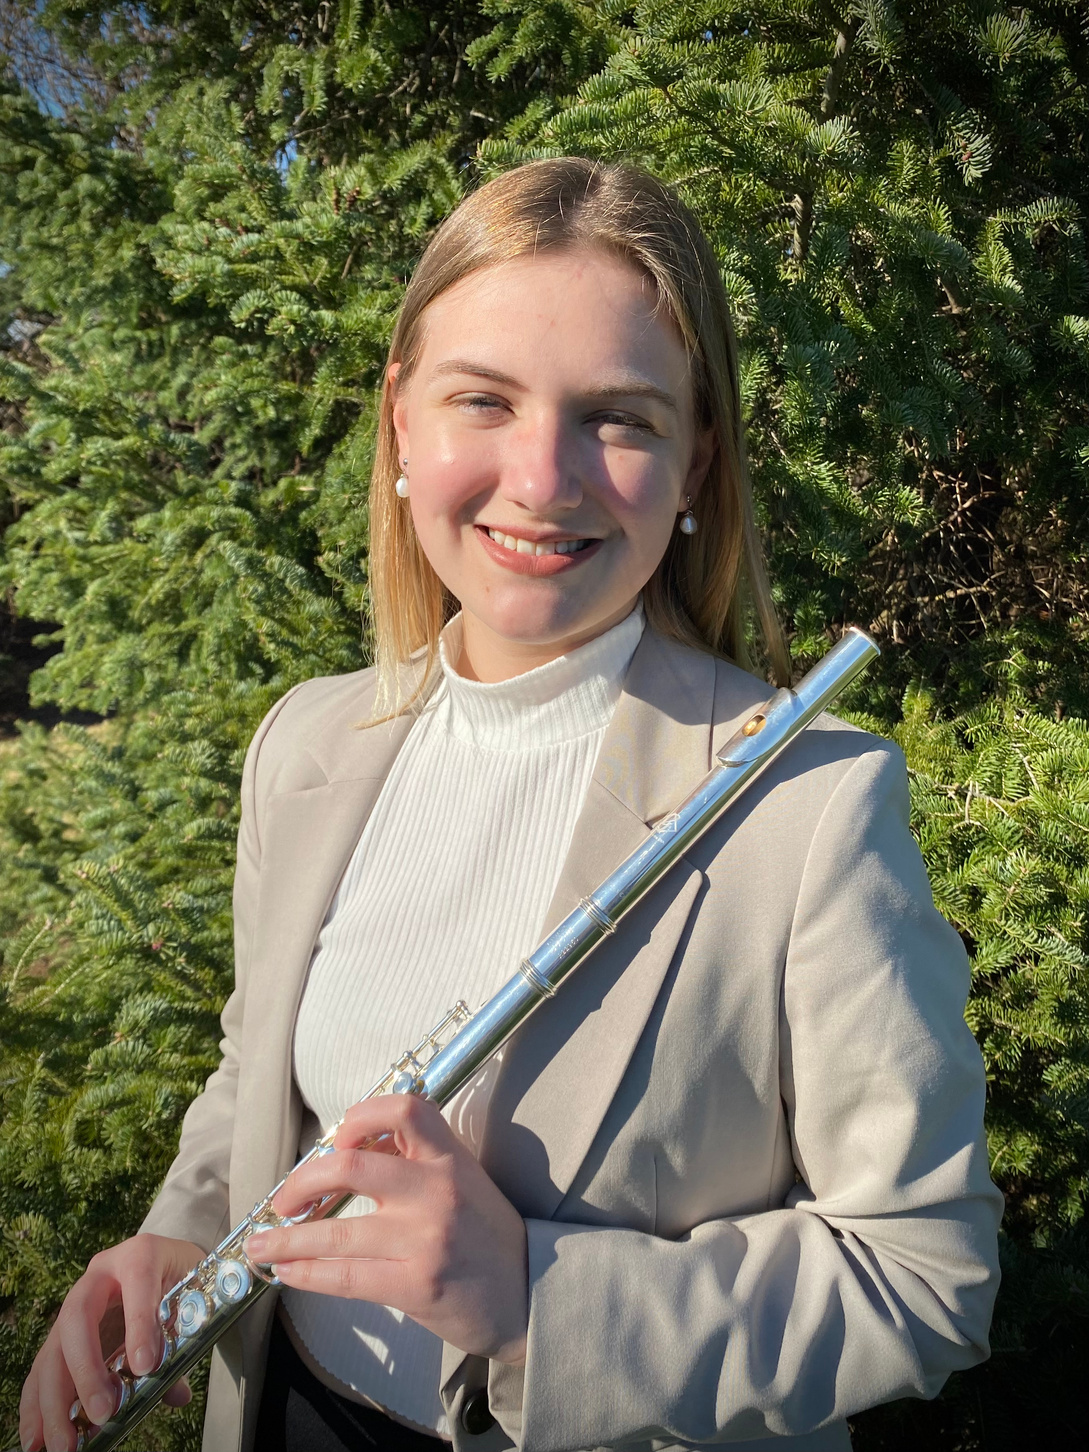 Lindsey Kovach, Flutist, Music Lessons, North Florida, Virtual Flute Lessons, Tallahassee Flute Lessons, Florida State University Flute Studio, Tallahassee Florida